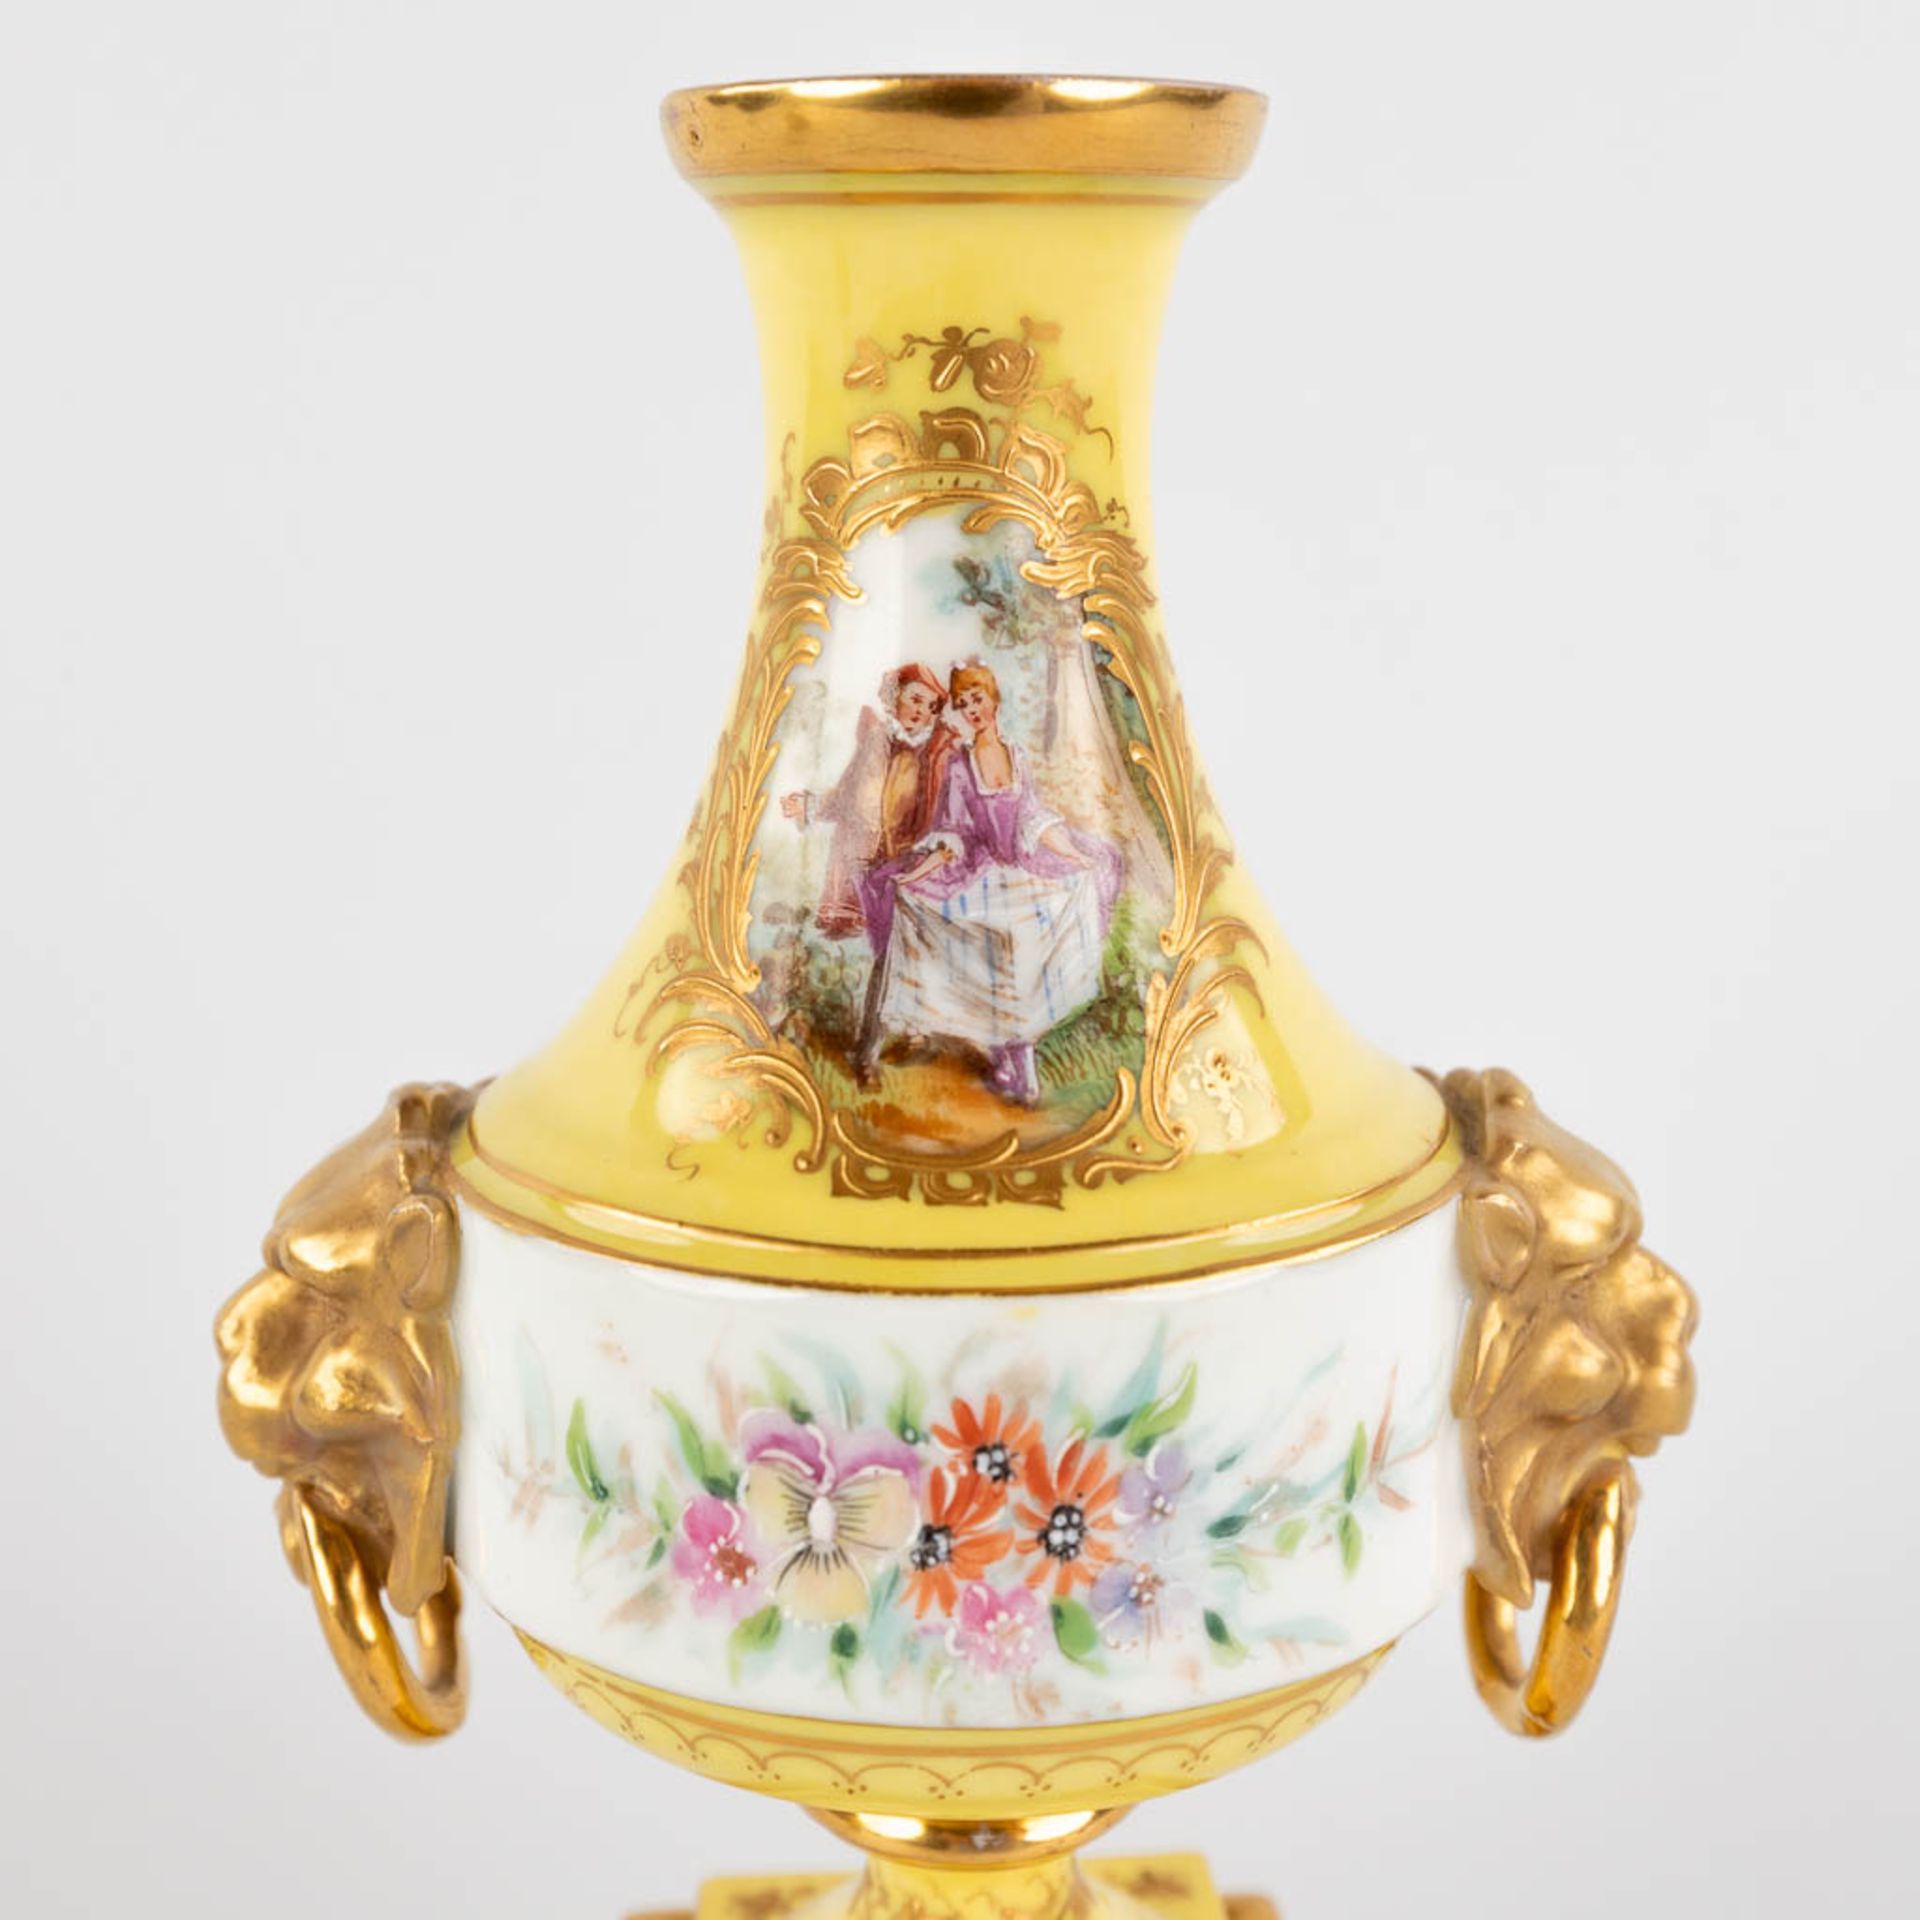 A pair of antique, hand-painted porcelain vases, yellow glaze and flower with lion's heads decor. (L - Image 15 of 16